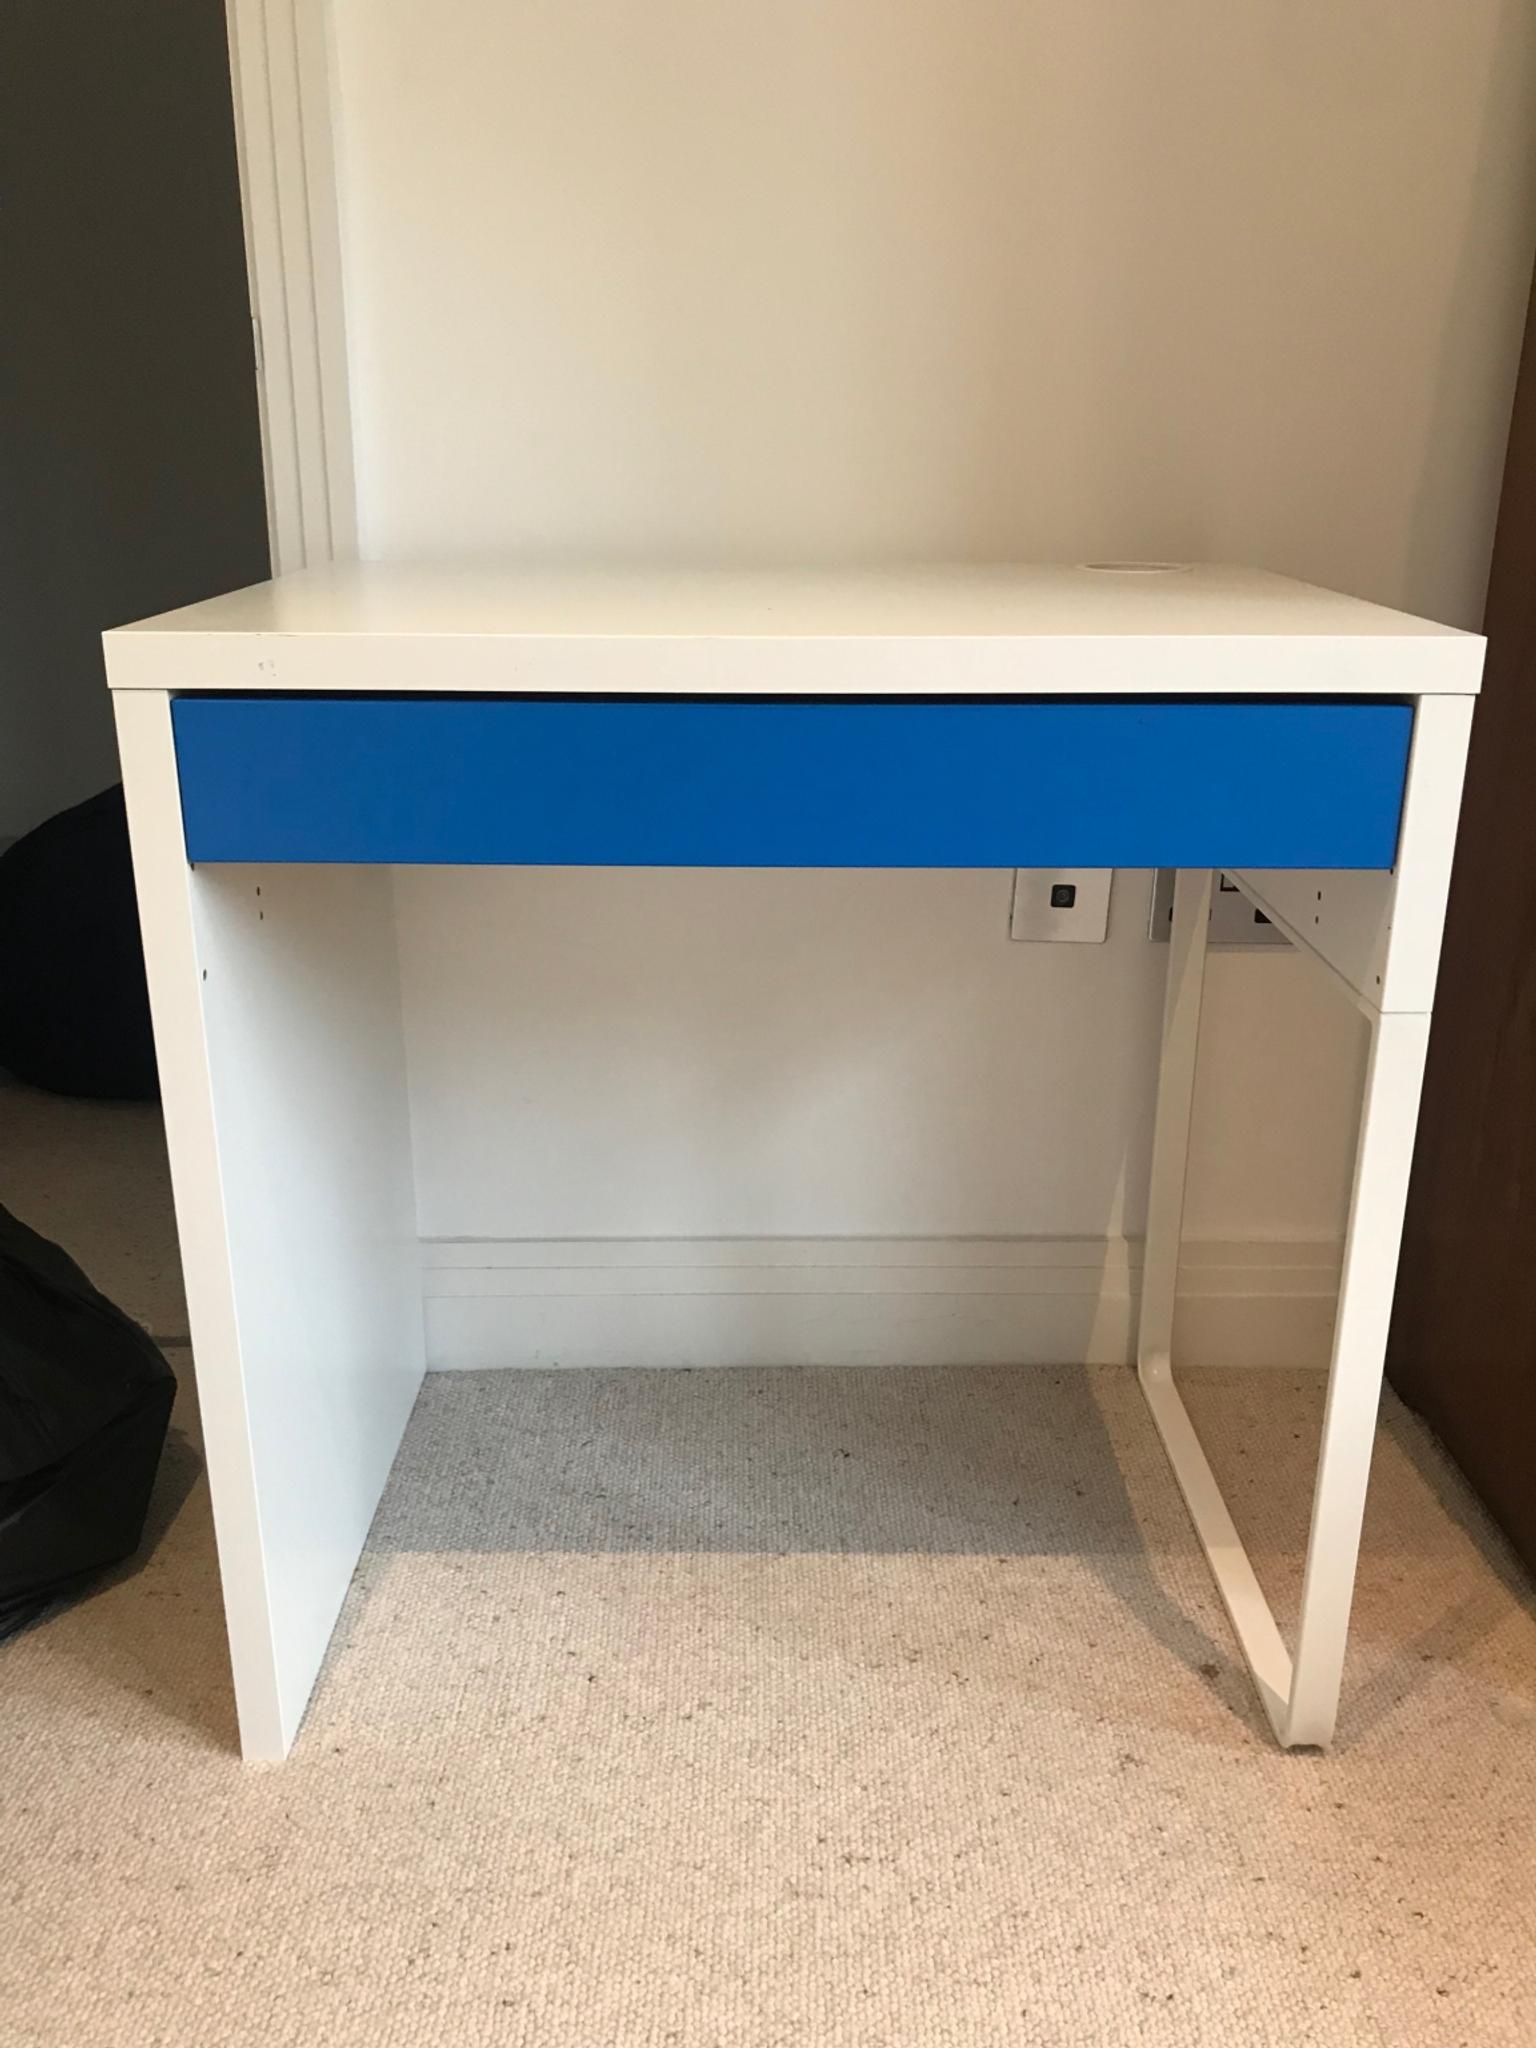 Ikea Kids Desk With Blue Drawer In Cm15 Brentwood For 7 00 For